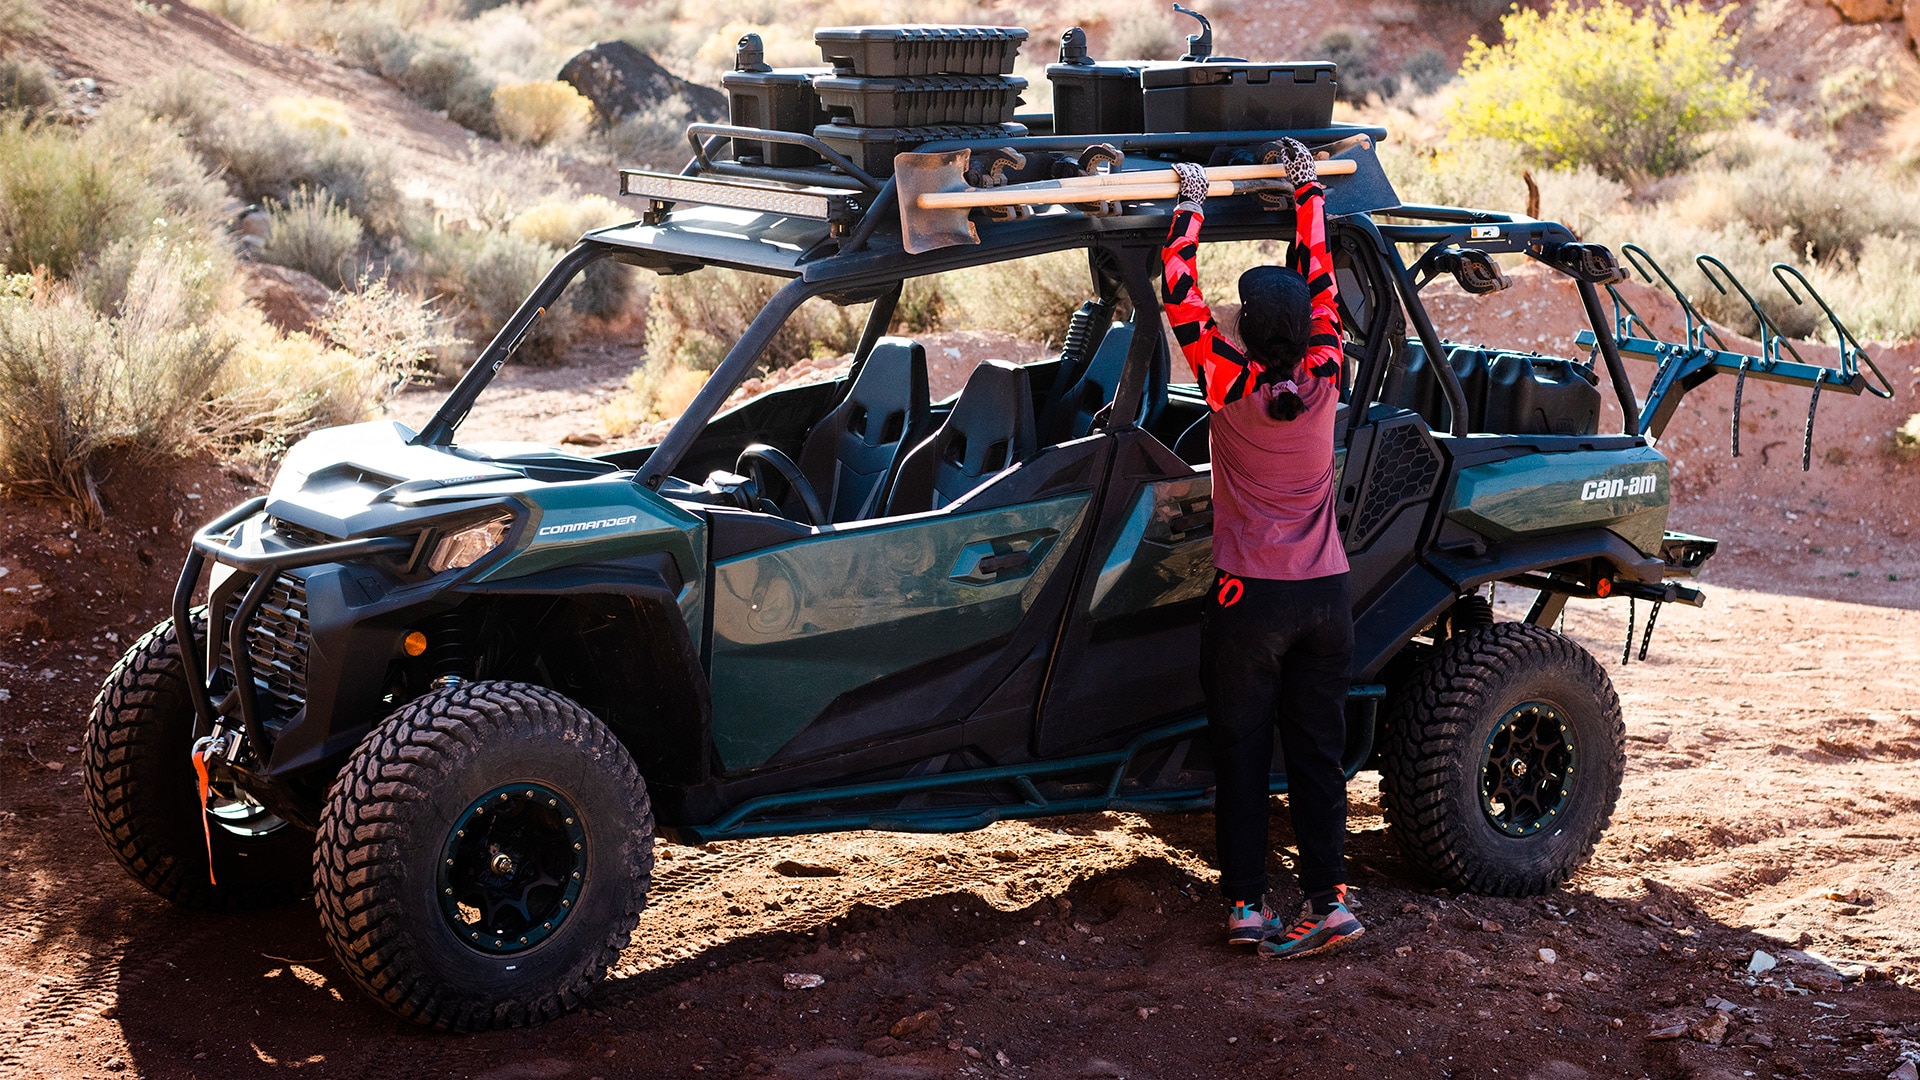 Samantha Soriano placing a shovel securely on the Can-Am Commander she has been riding outdoors on a trai